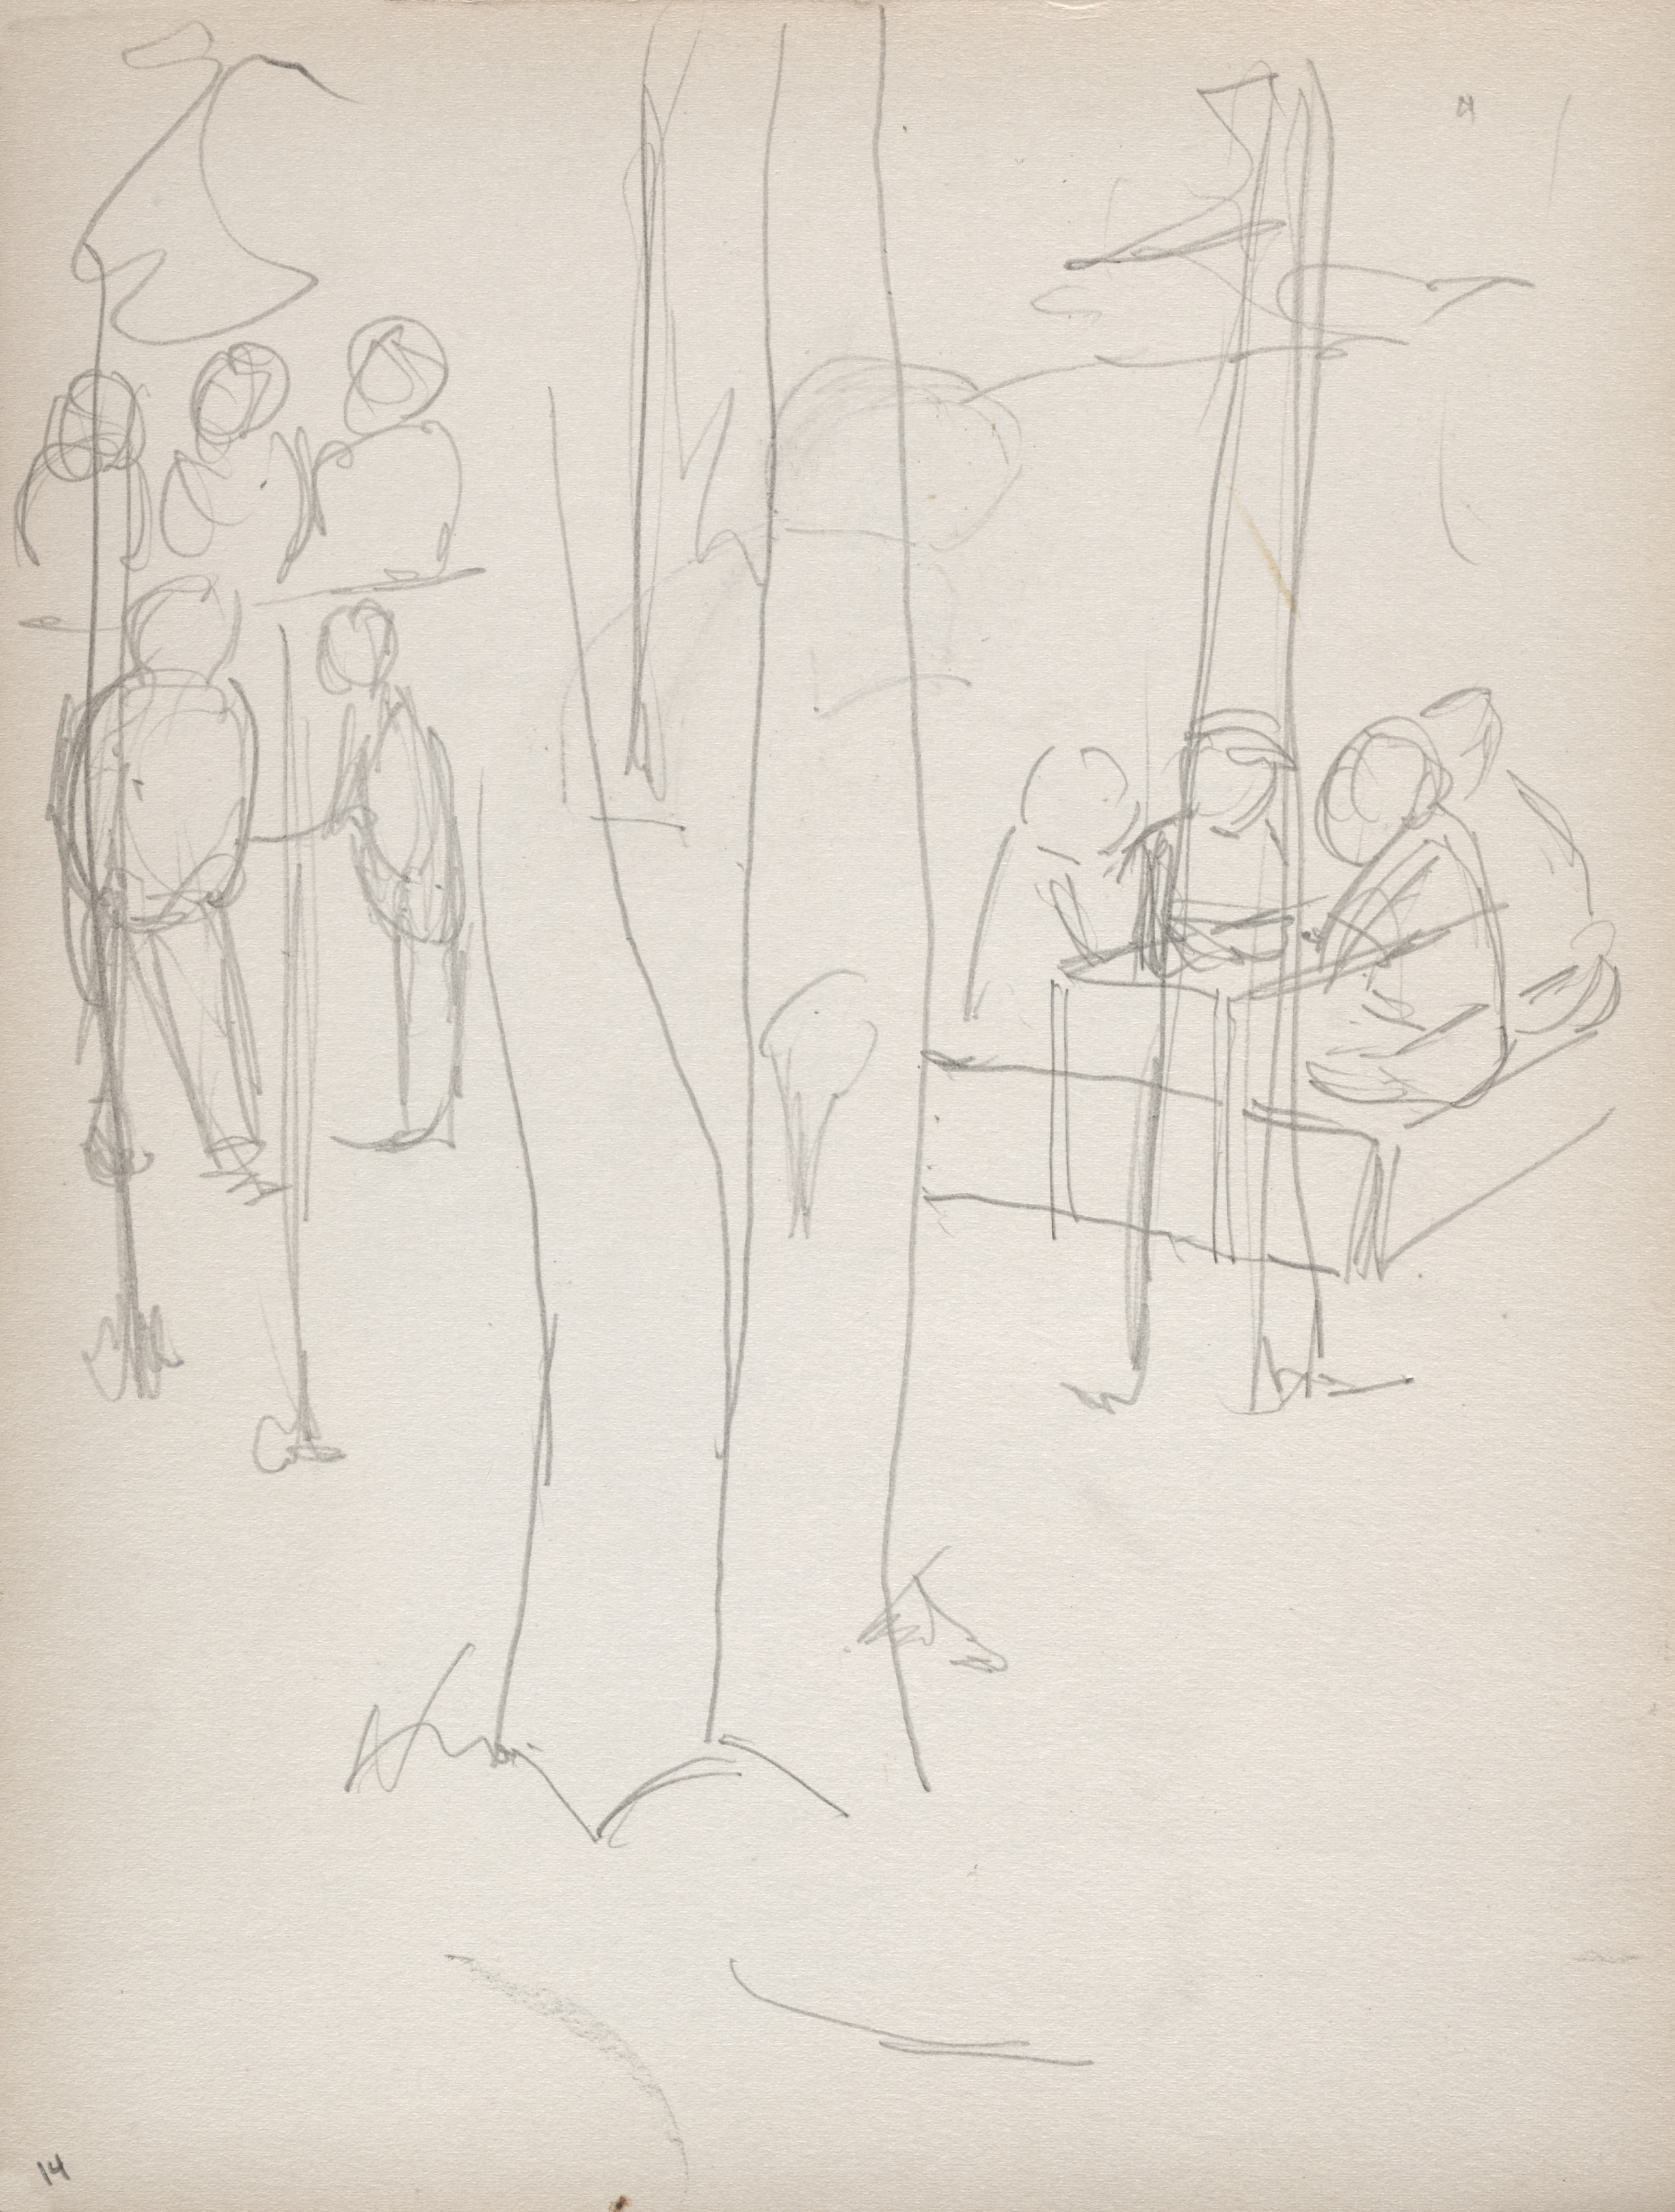 Sketchbook No. 3, page 14: Figures at a Picnic Table